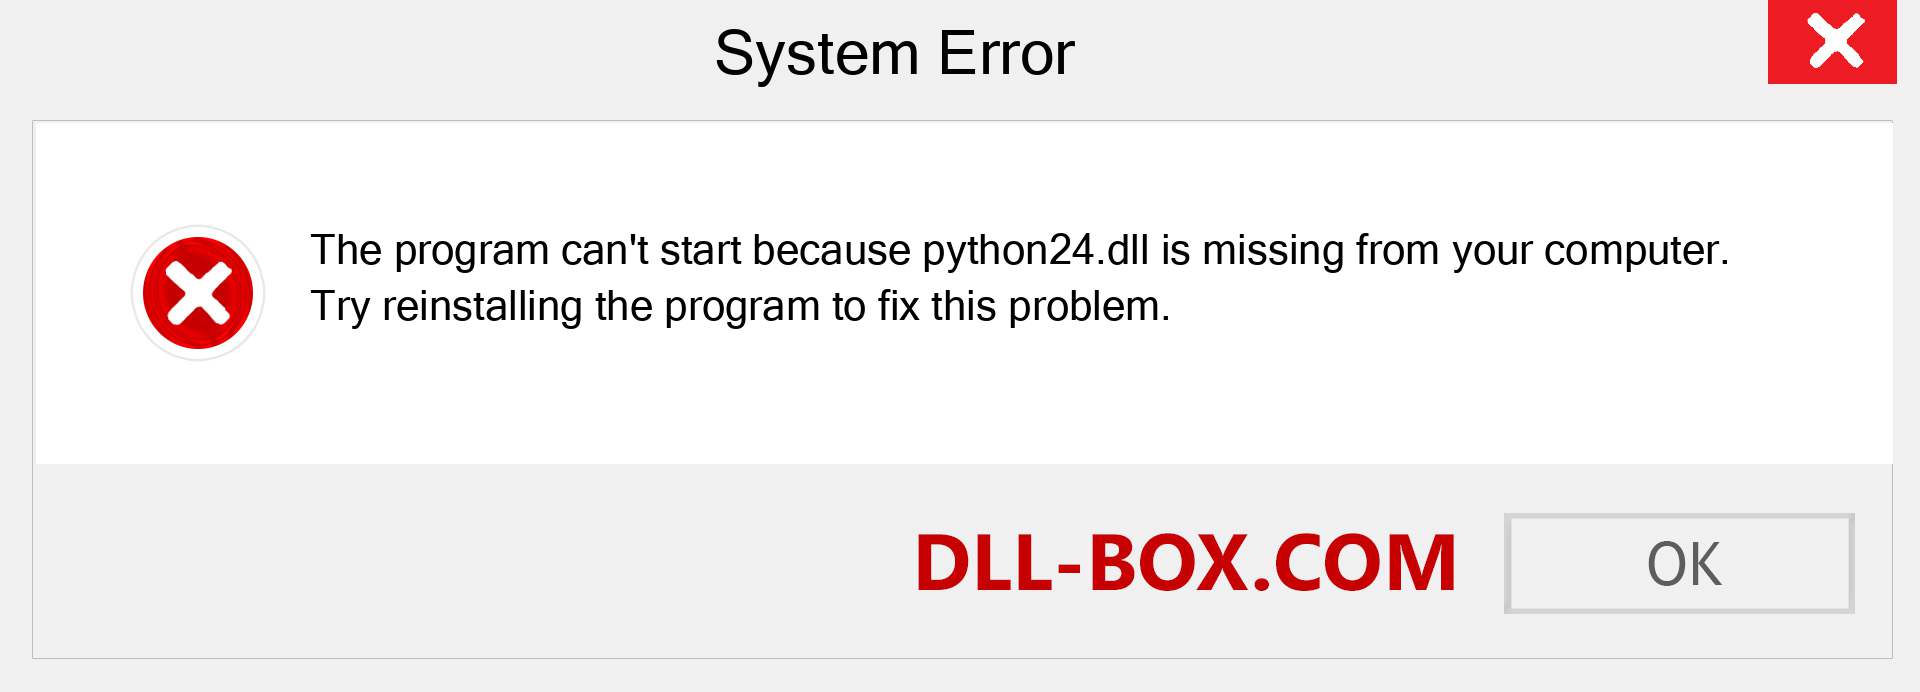  python24.dll file is missing?. Download for Windows 7, 8, 10 - Fix  python24 dll Missing Error on Windows, photos, images